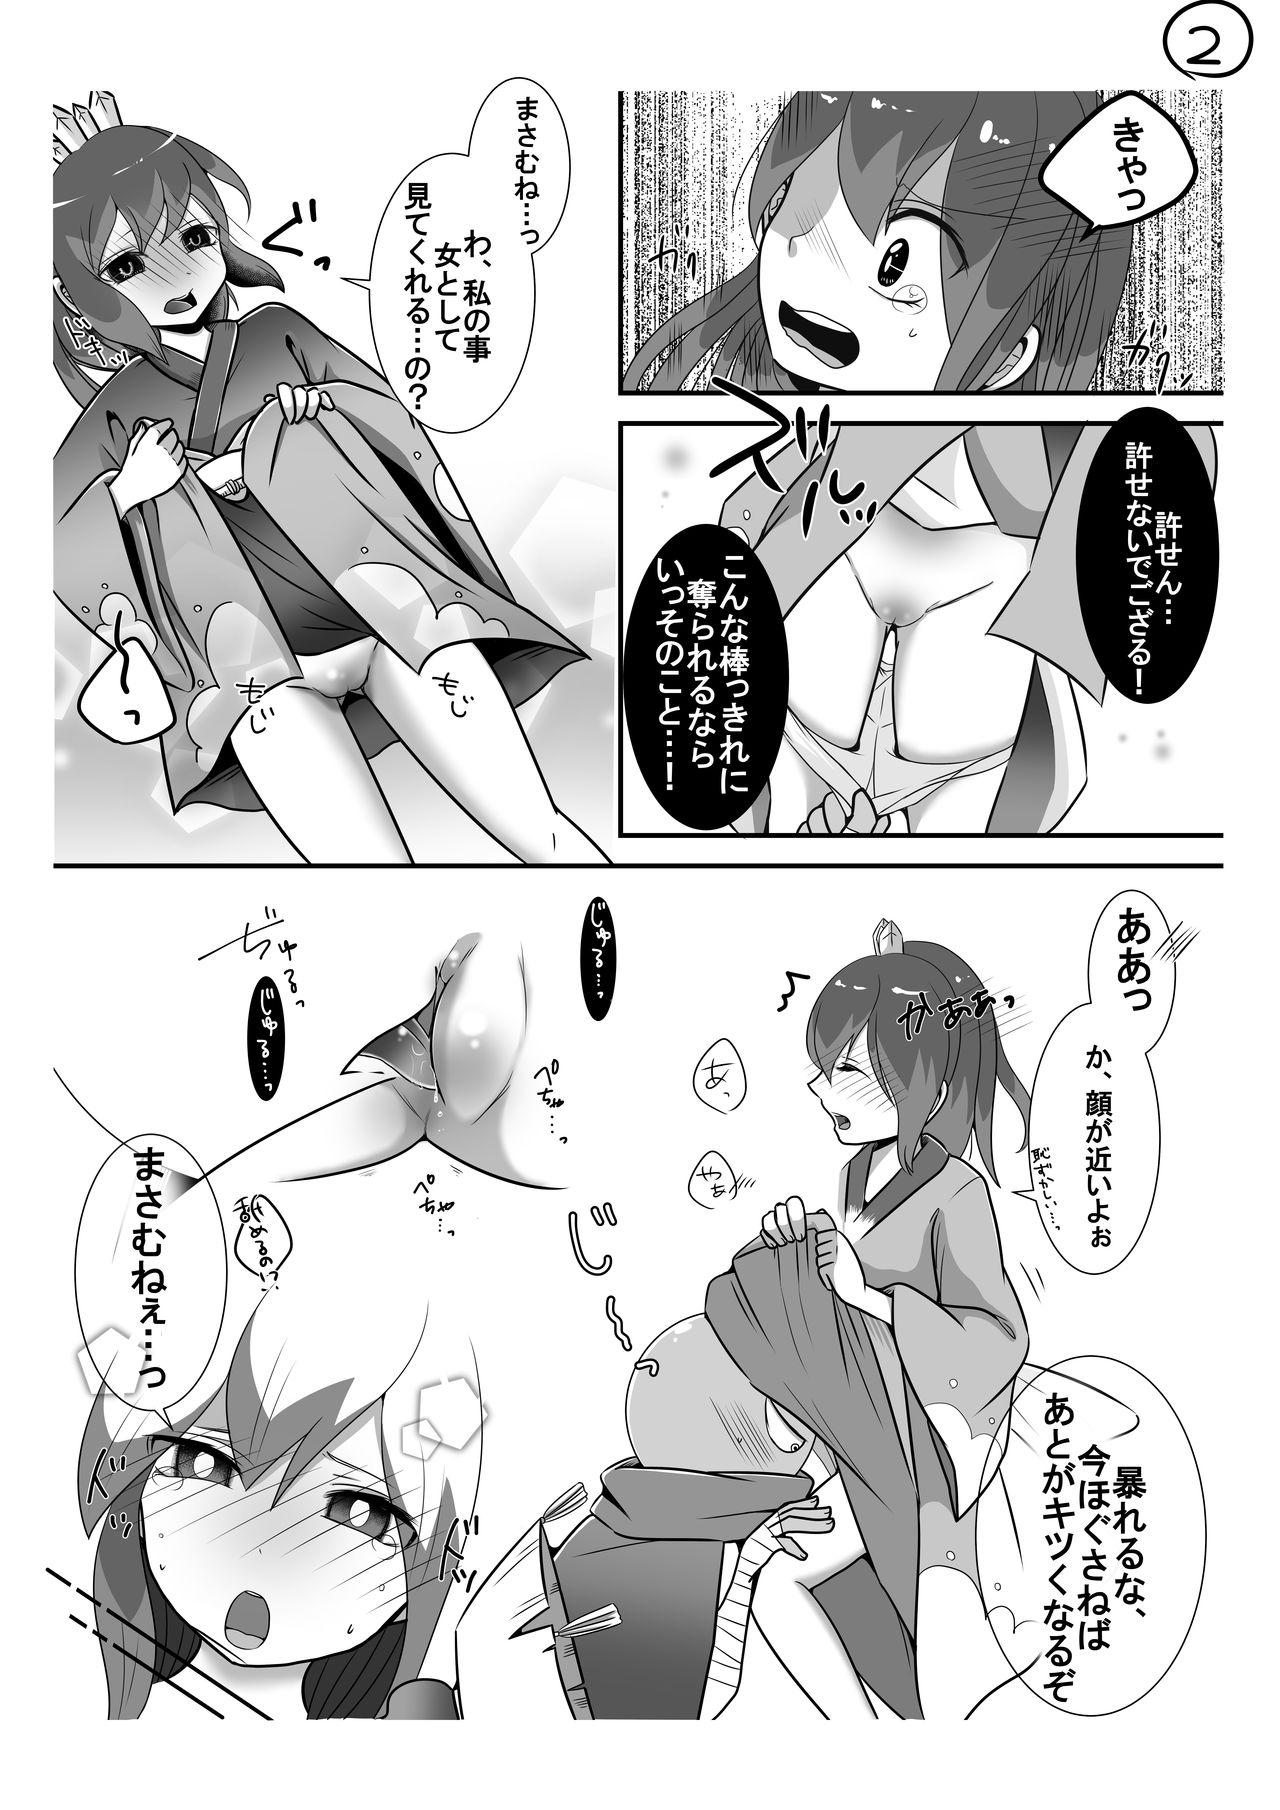 Riding お題「まさふぶ」 - Youkai watch Domination - Page 2